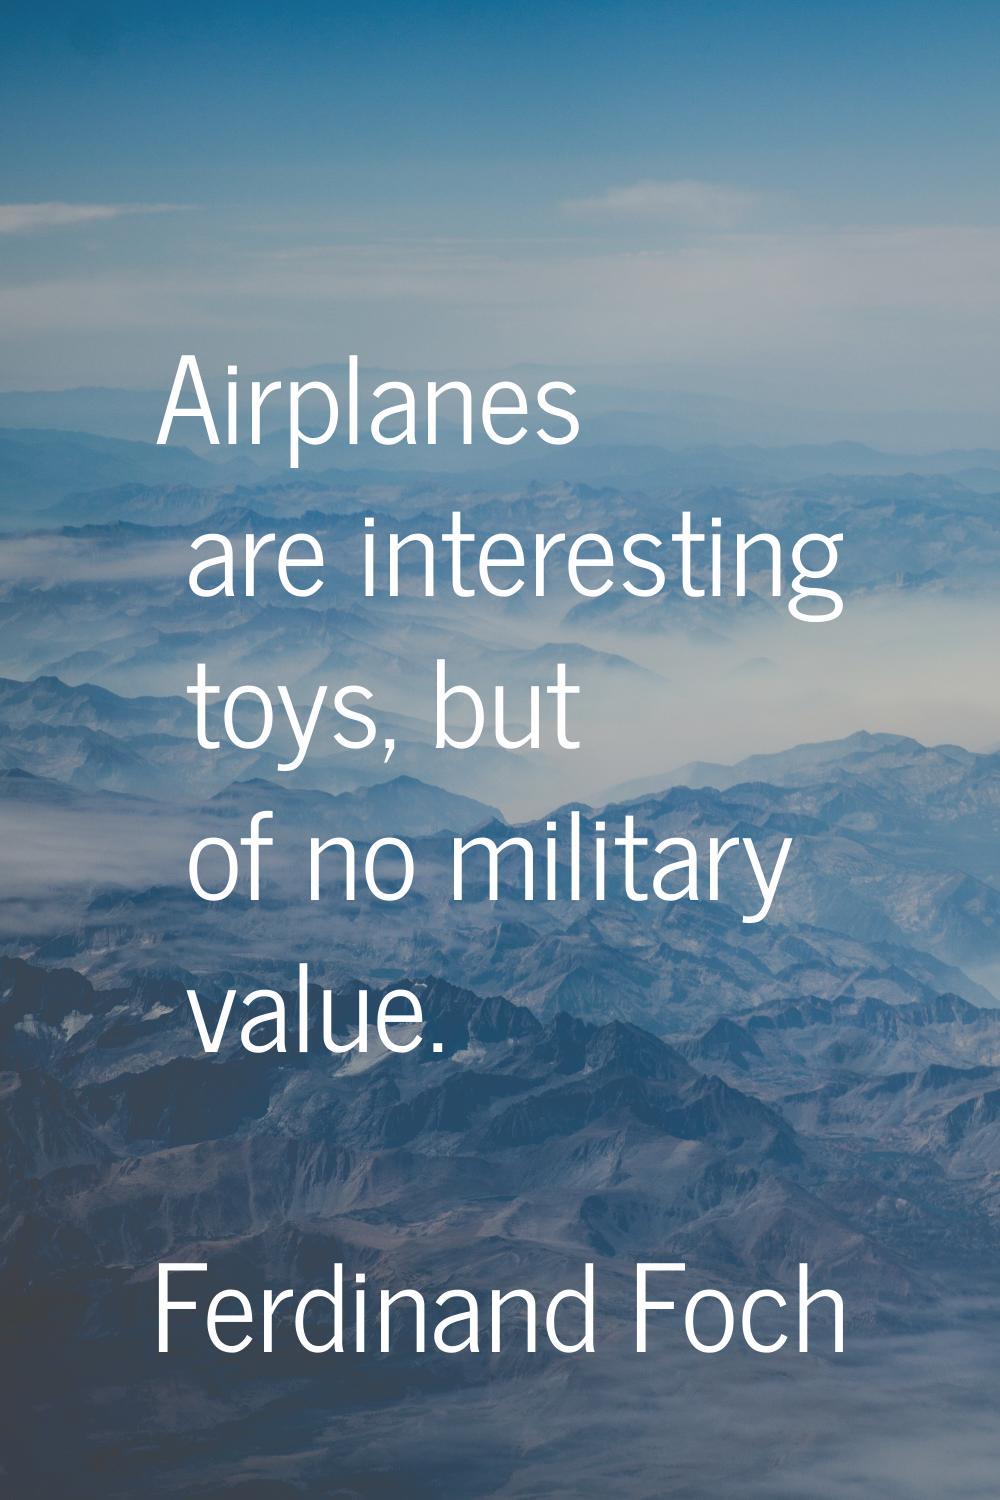 Airplanes are interesting toys, but of no military value.